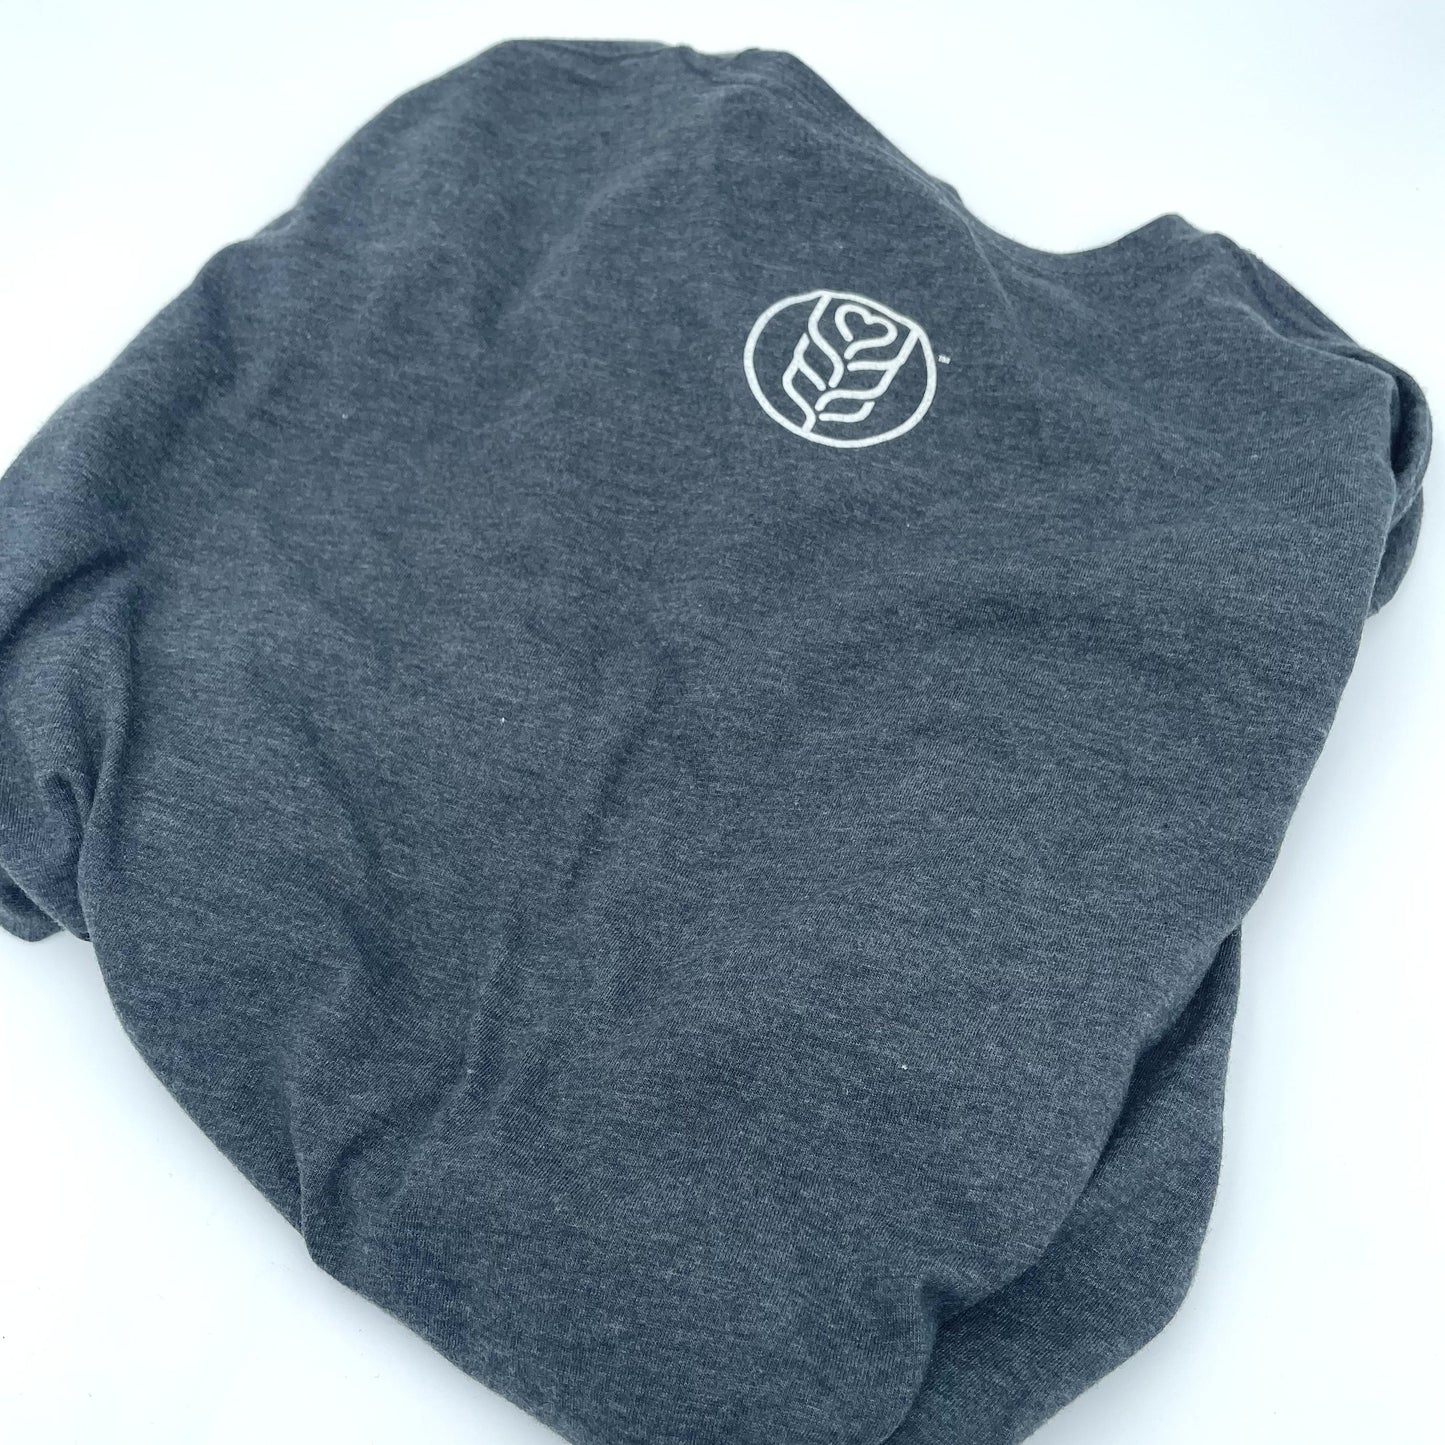 Charcoal Shirt with Parchment Logos - Unisex